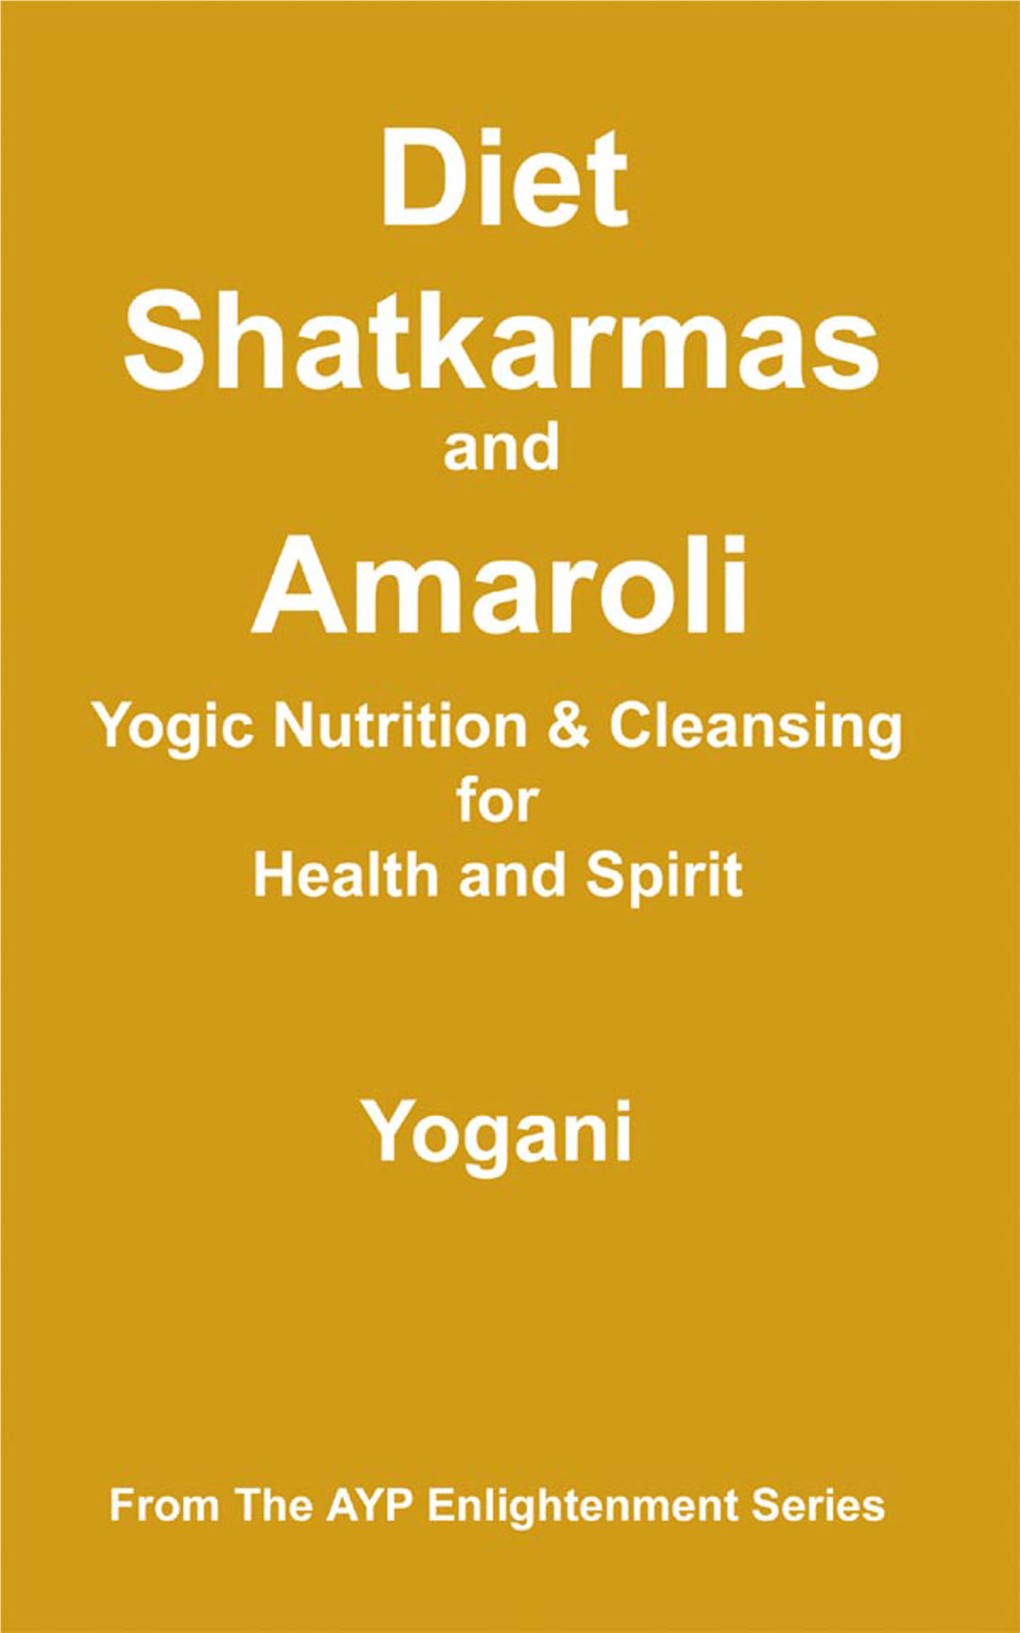 Diet, Shatkarmas and Amaroli – Yogic Nutrition & Cleansing for Health and Spirit